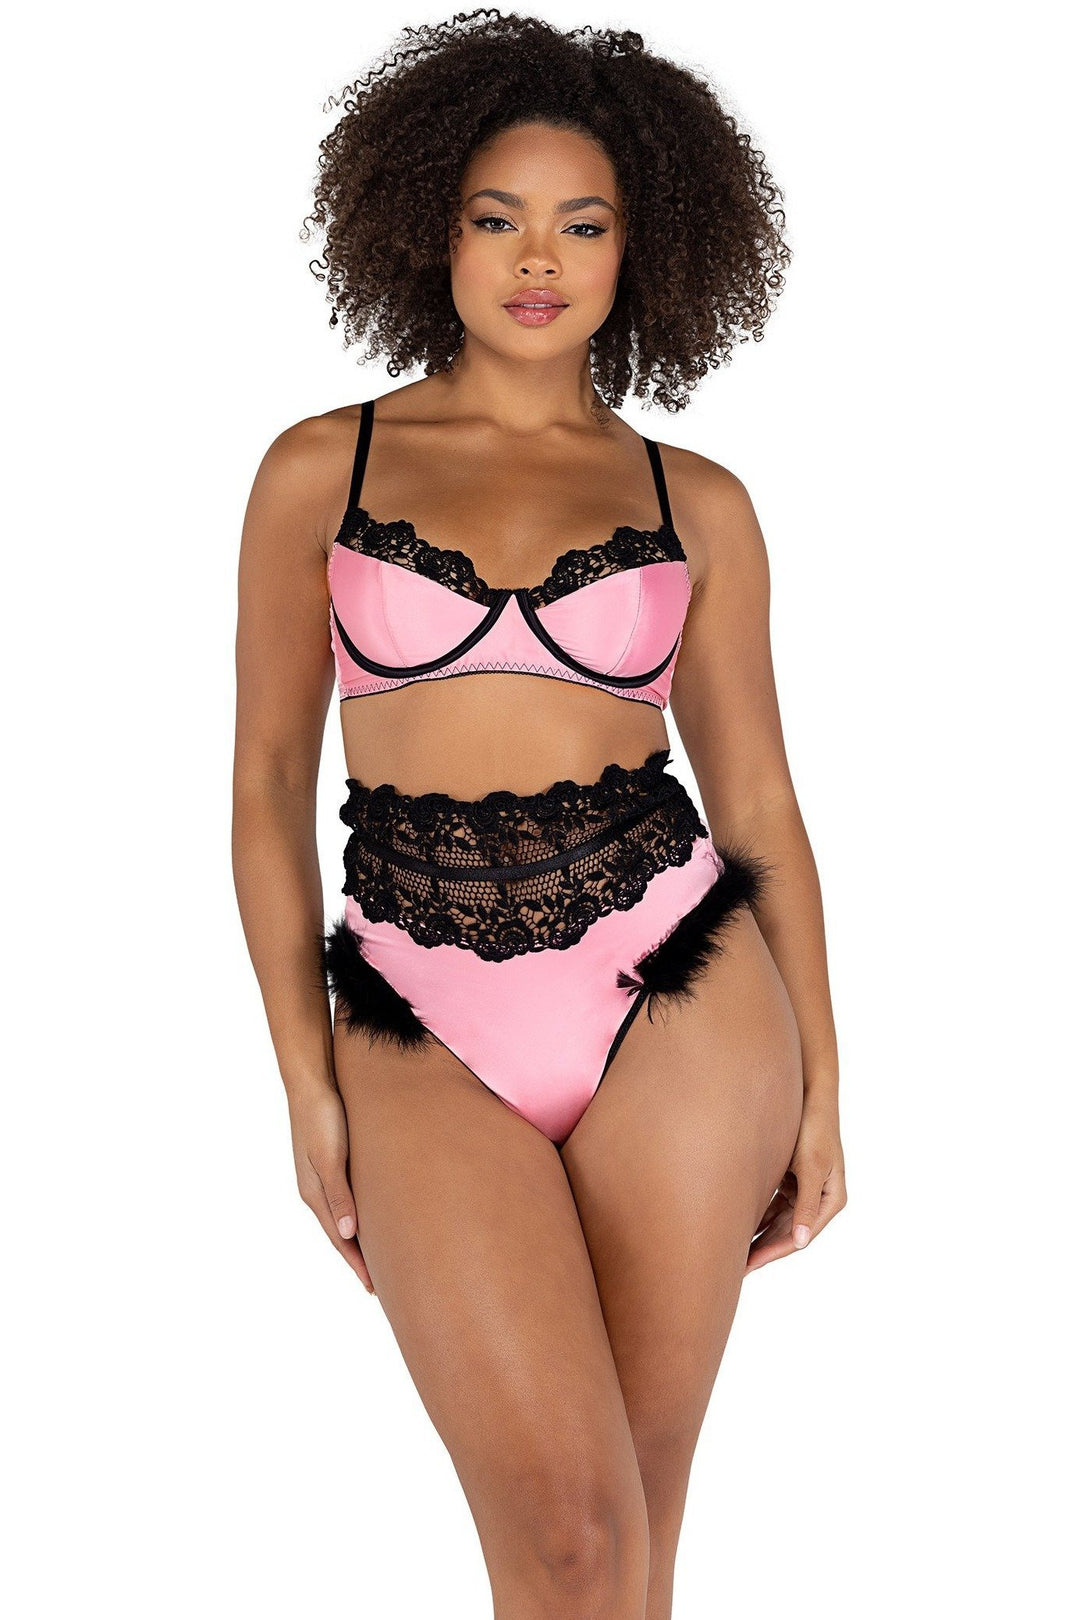 Embroidered & Satin Bralette with Underwire Support & High-Waisted Shorts with Faux Fur Trim-Lingerie Sets-Roma Confidential-SEXYSHOES.COM